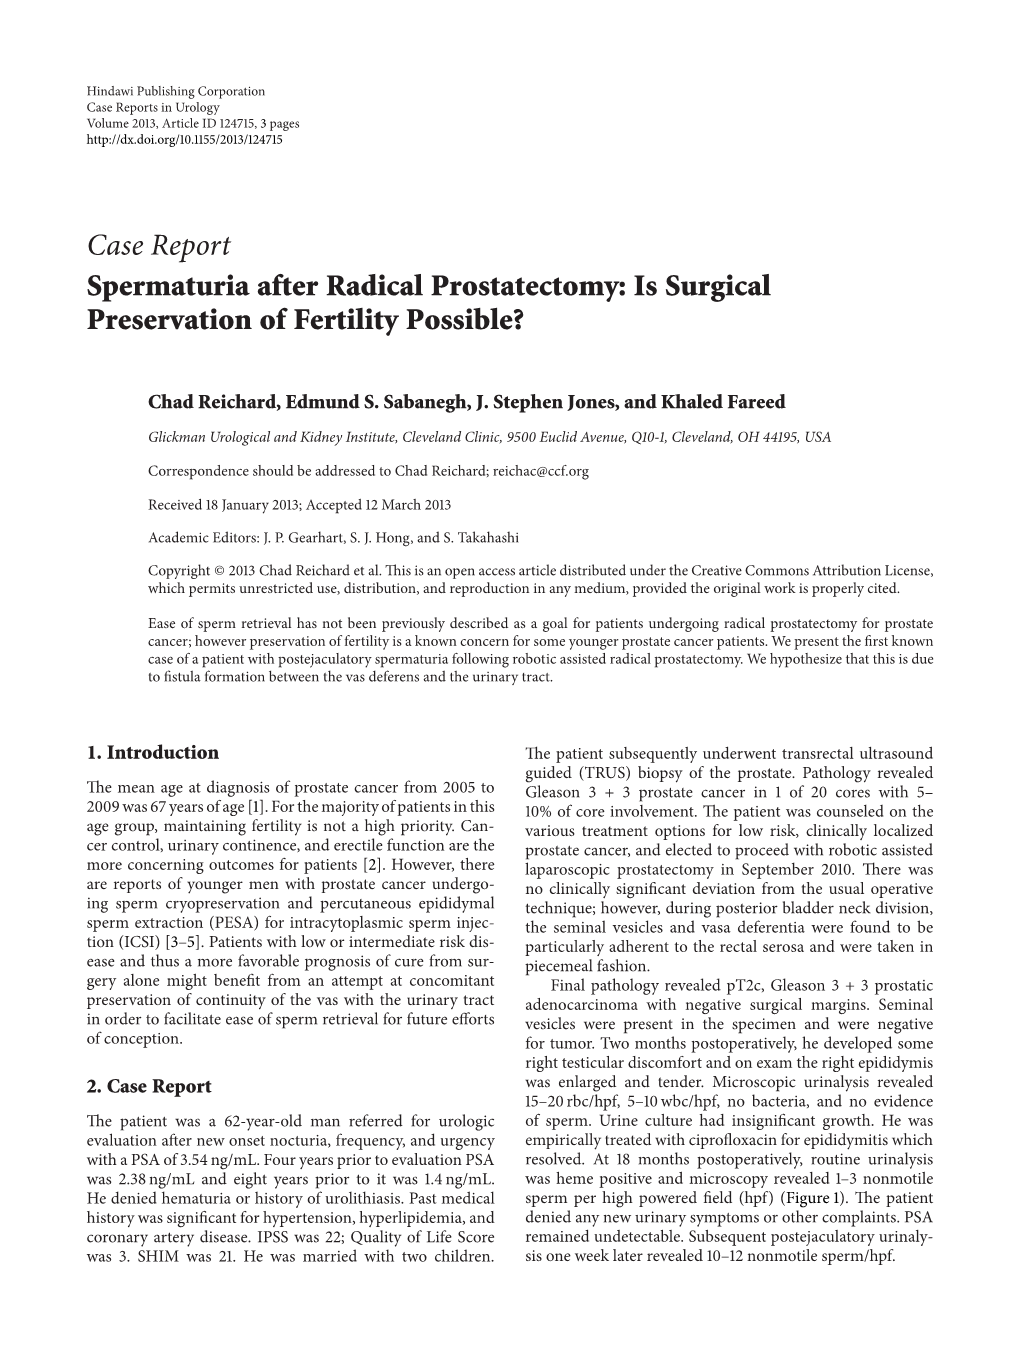 Spermaturia After Radical Prostatectomy: Is Surgical Preservation of Fertility Possible?